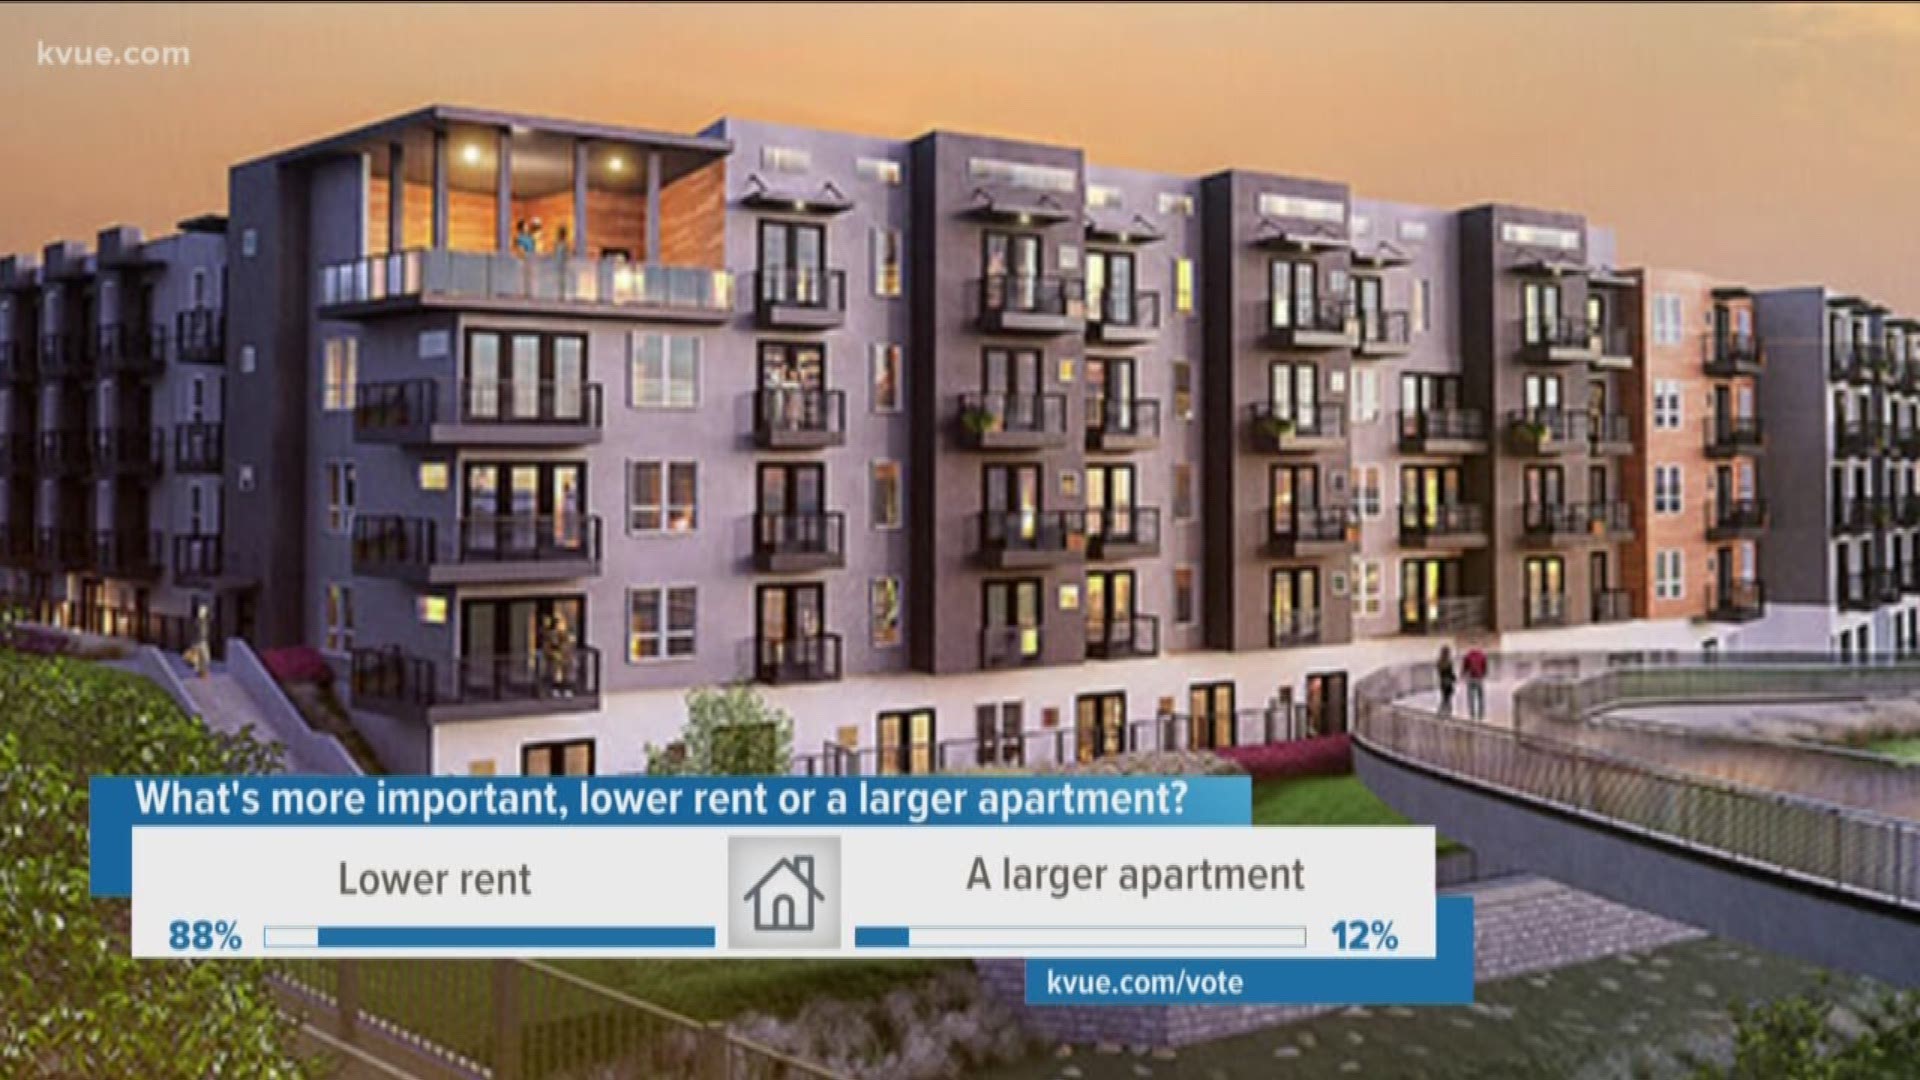 Pattrik Perez checked in with an apartment locator to find out just how much attention these smaller apartments are getting.